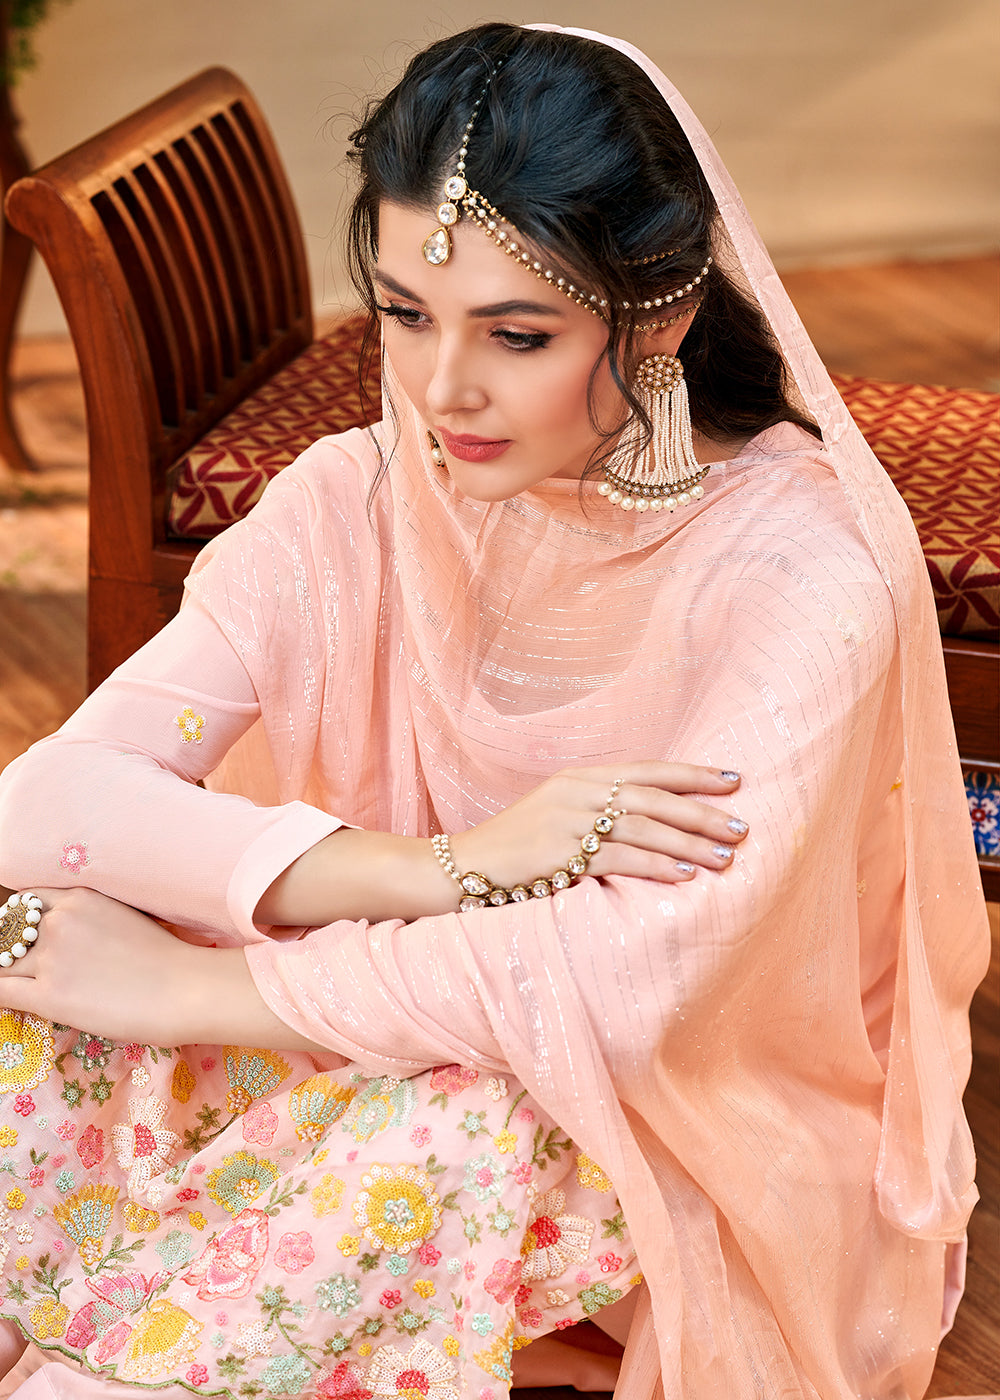 Photography poses in salwar kameez Stock Photos - Page 1 : Masterfile